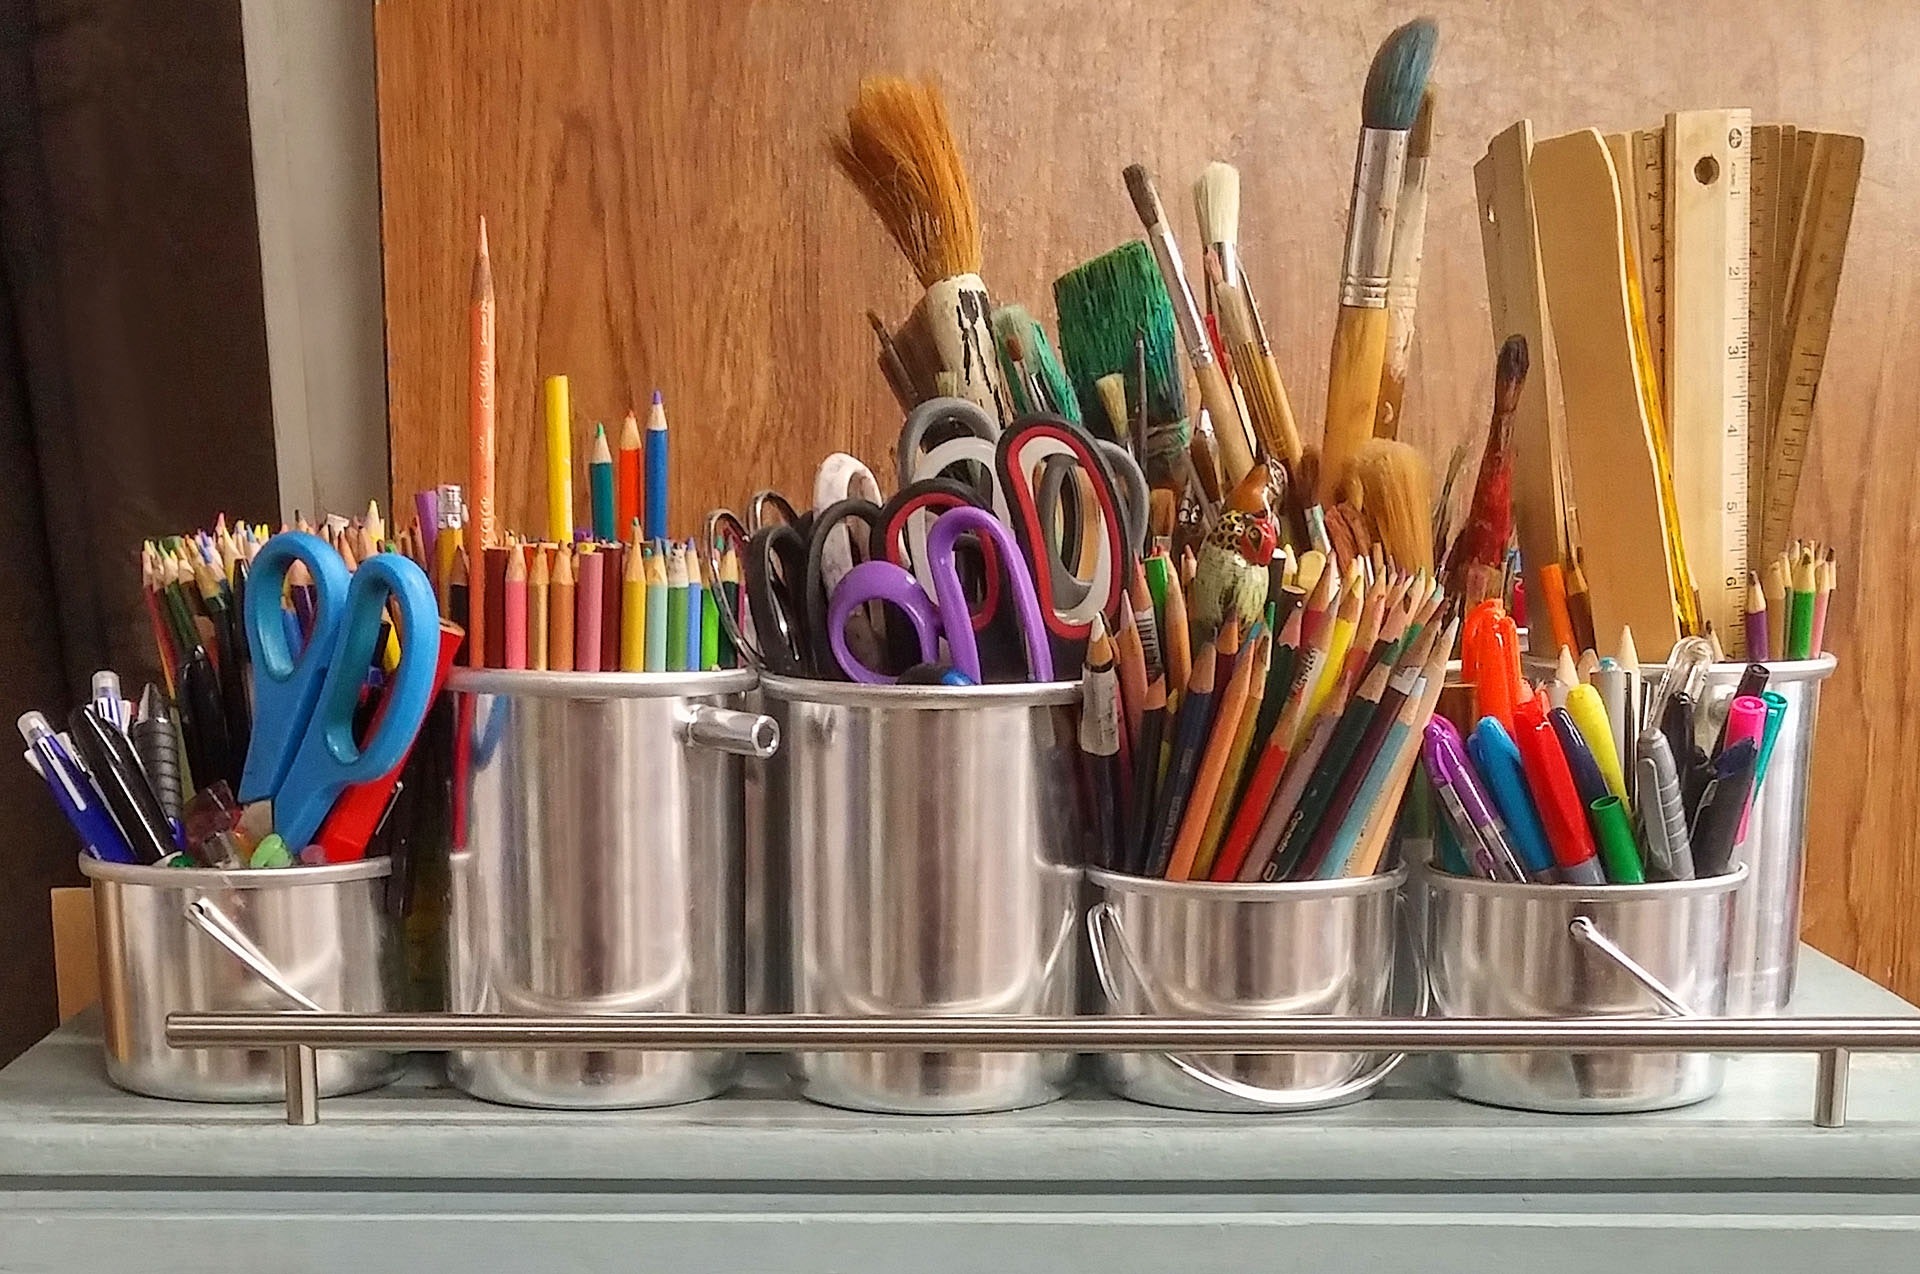 Colored pencils, markers, scissors, rulers, ink pens, and paintbrushes are shown in metal buckets.